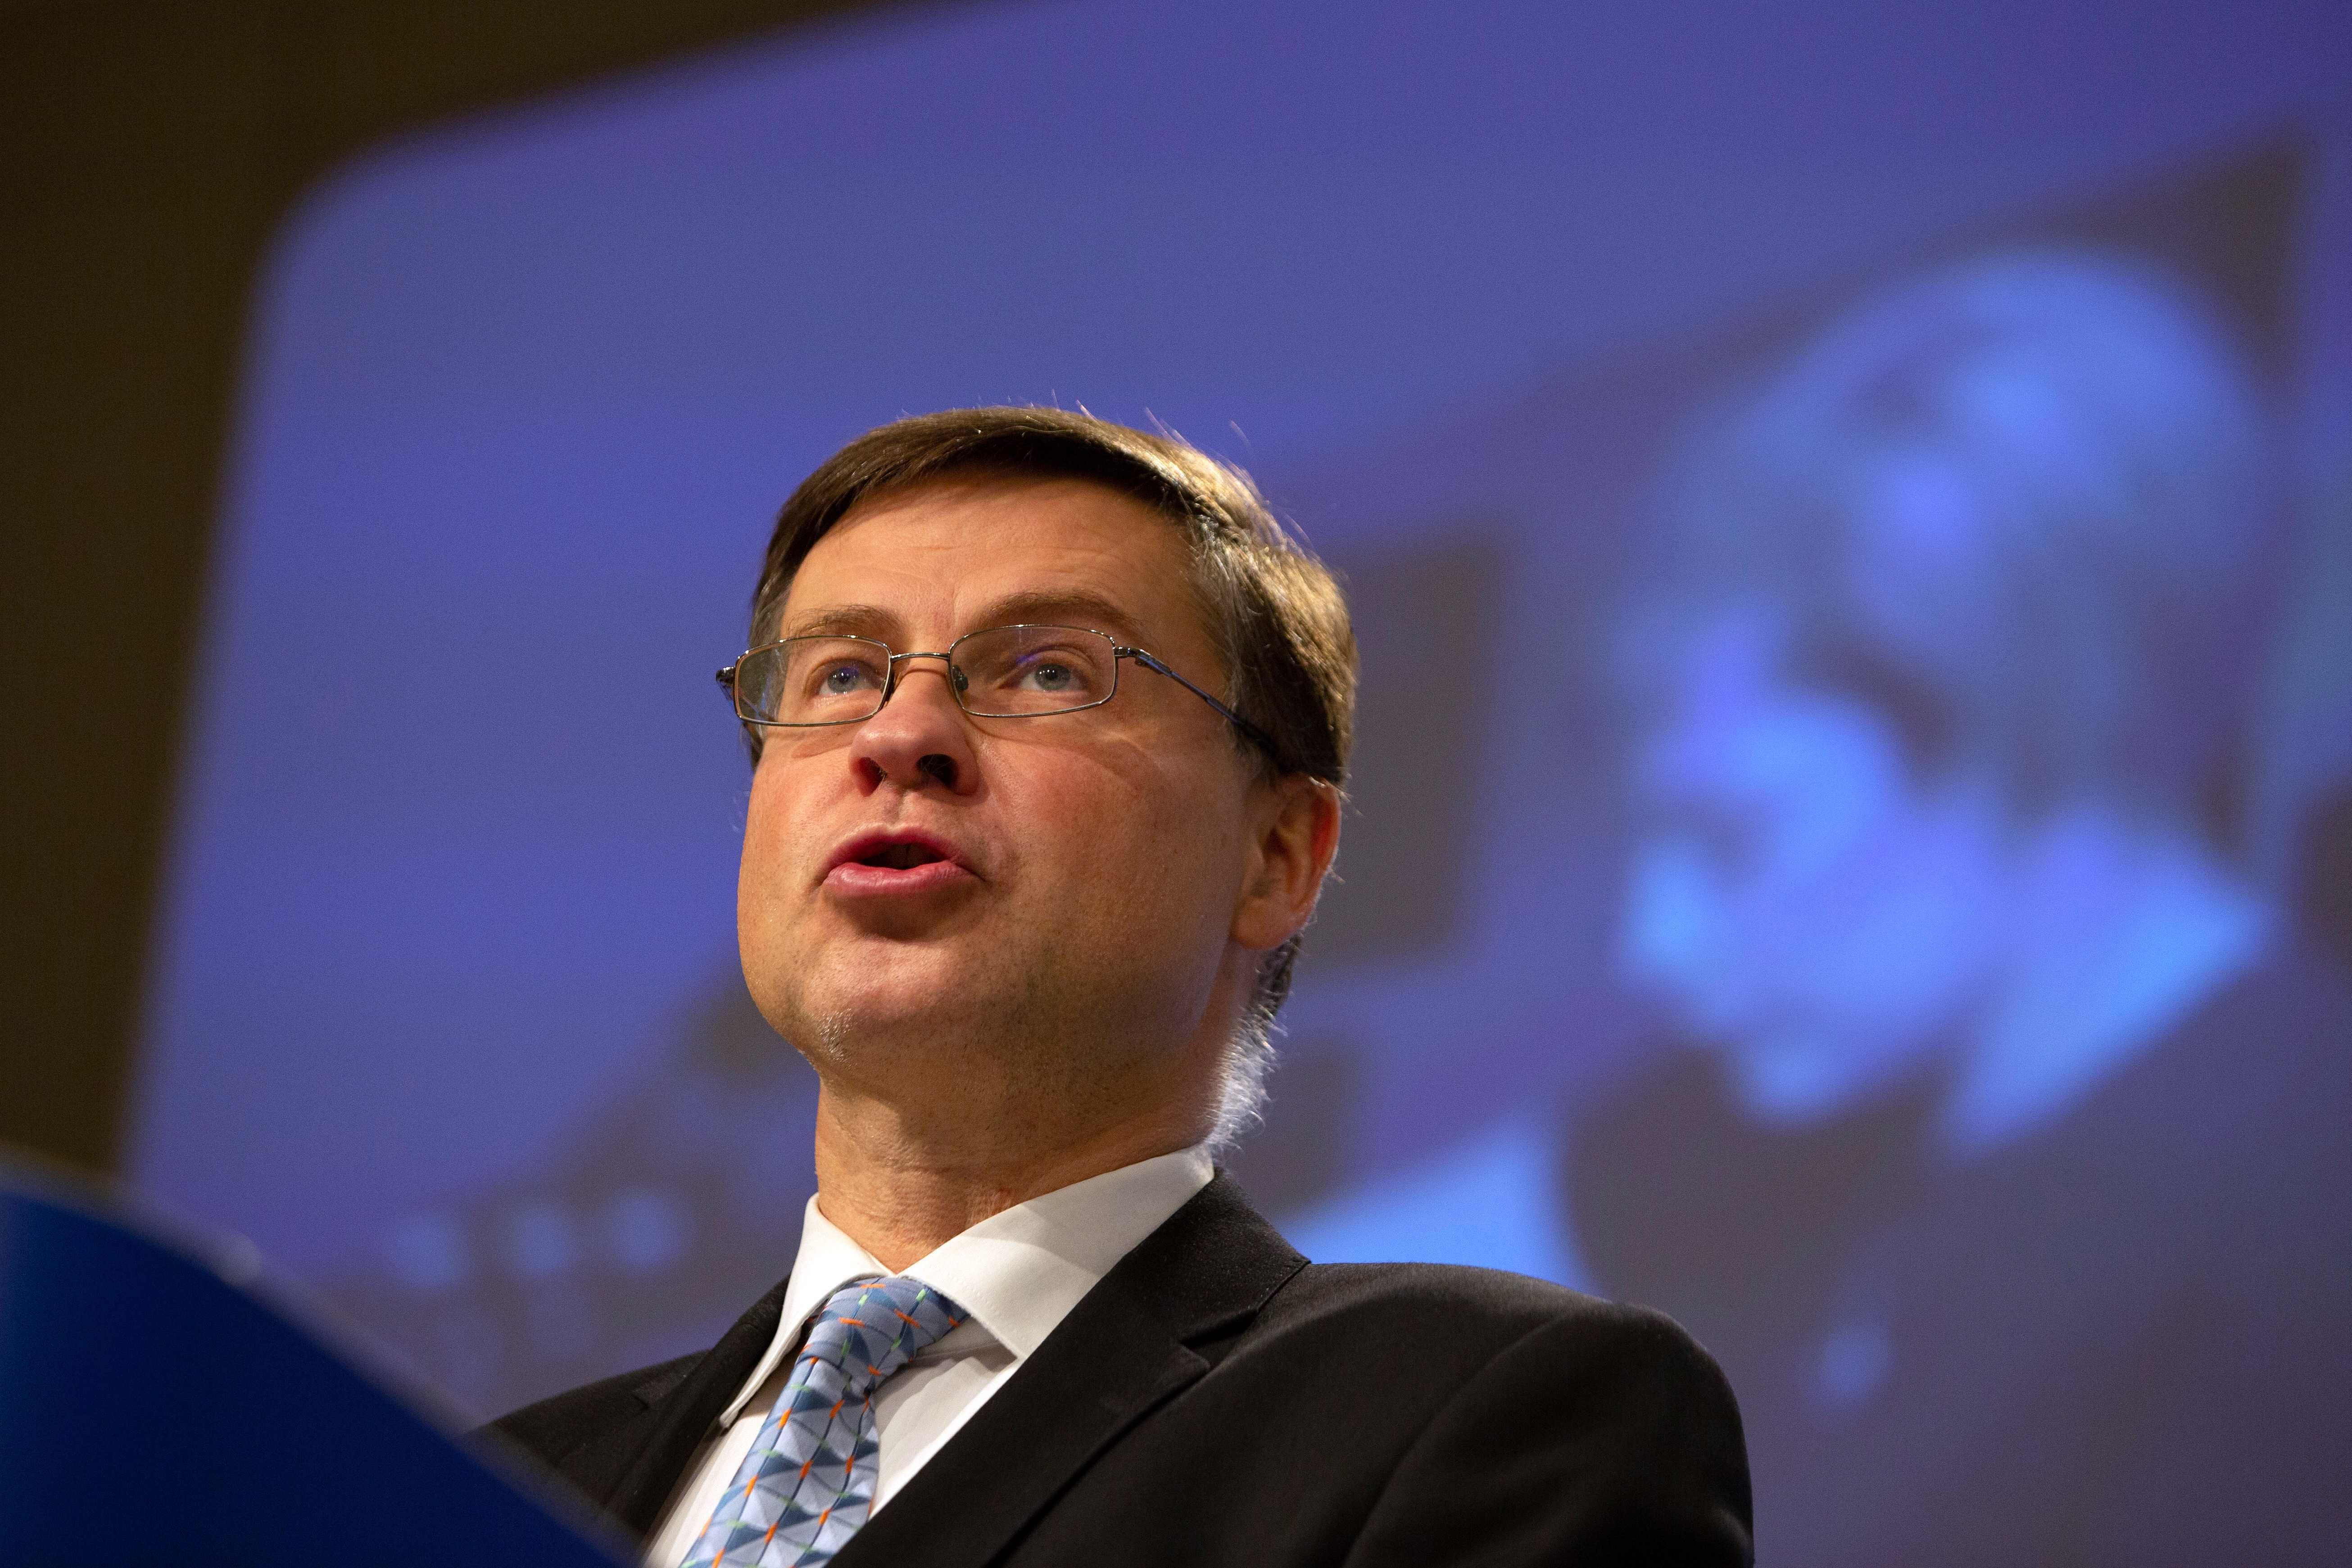 European Commission vice-president in charge the Euro, Social Dialogue, Financial Stability, Financial Services and Capital Markets Union Valdis Dombrovskis. Credits: AFP Photo